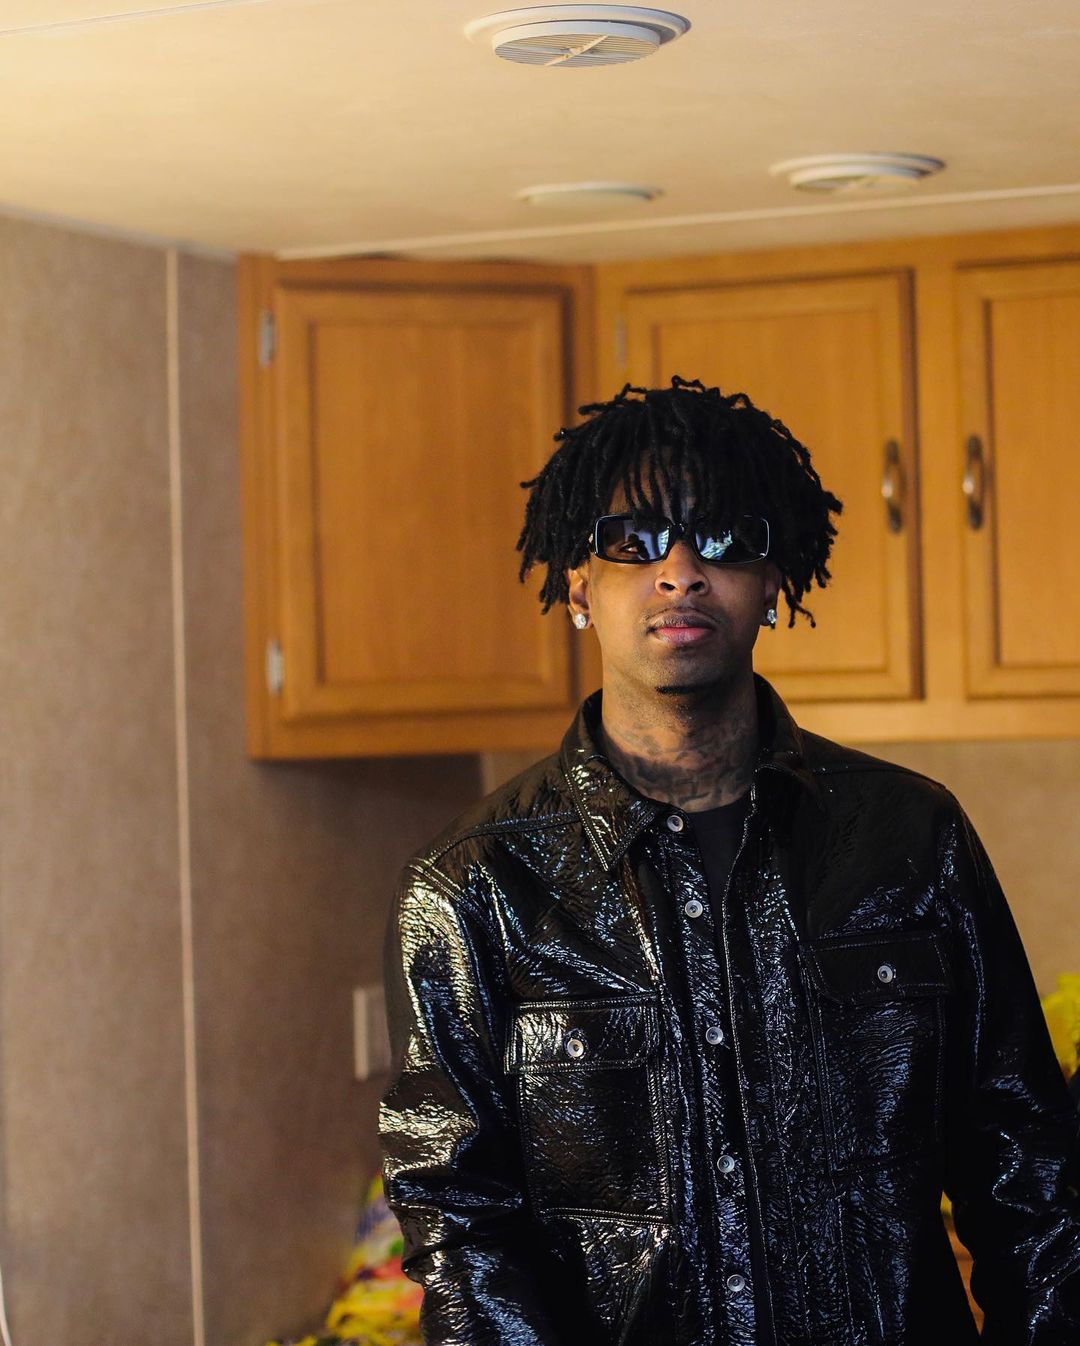 SPOTTED: 21 Savage Poses in All Black Chrome Hearts, Rick Owens